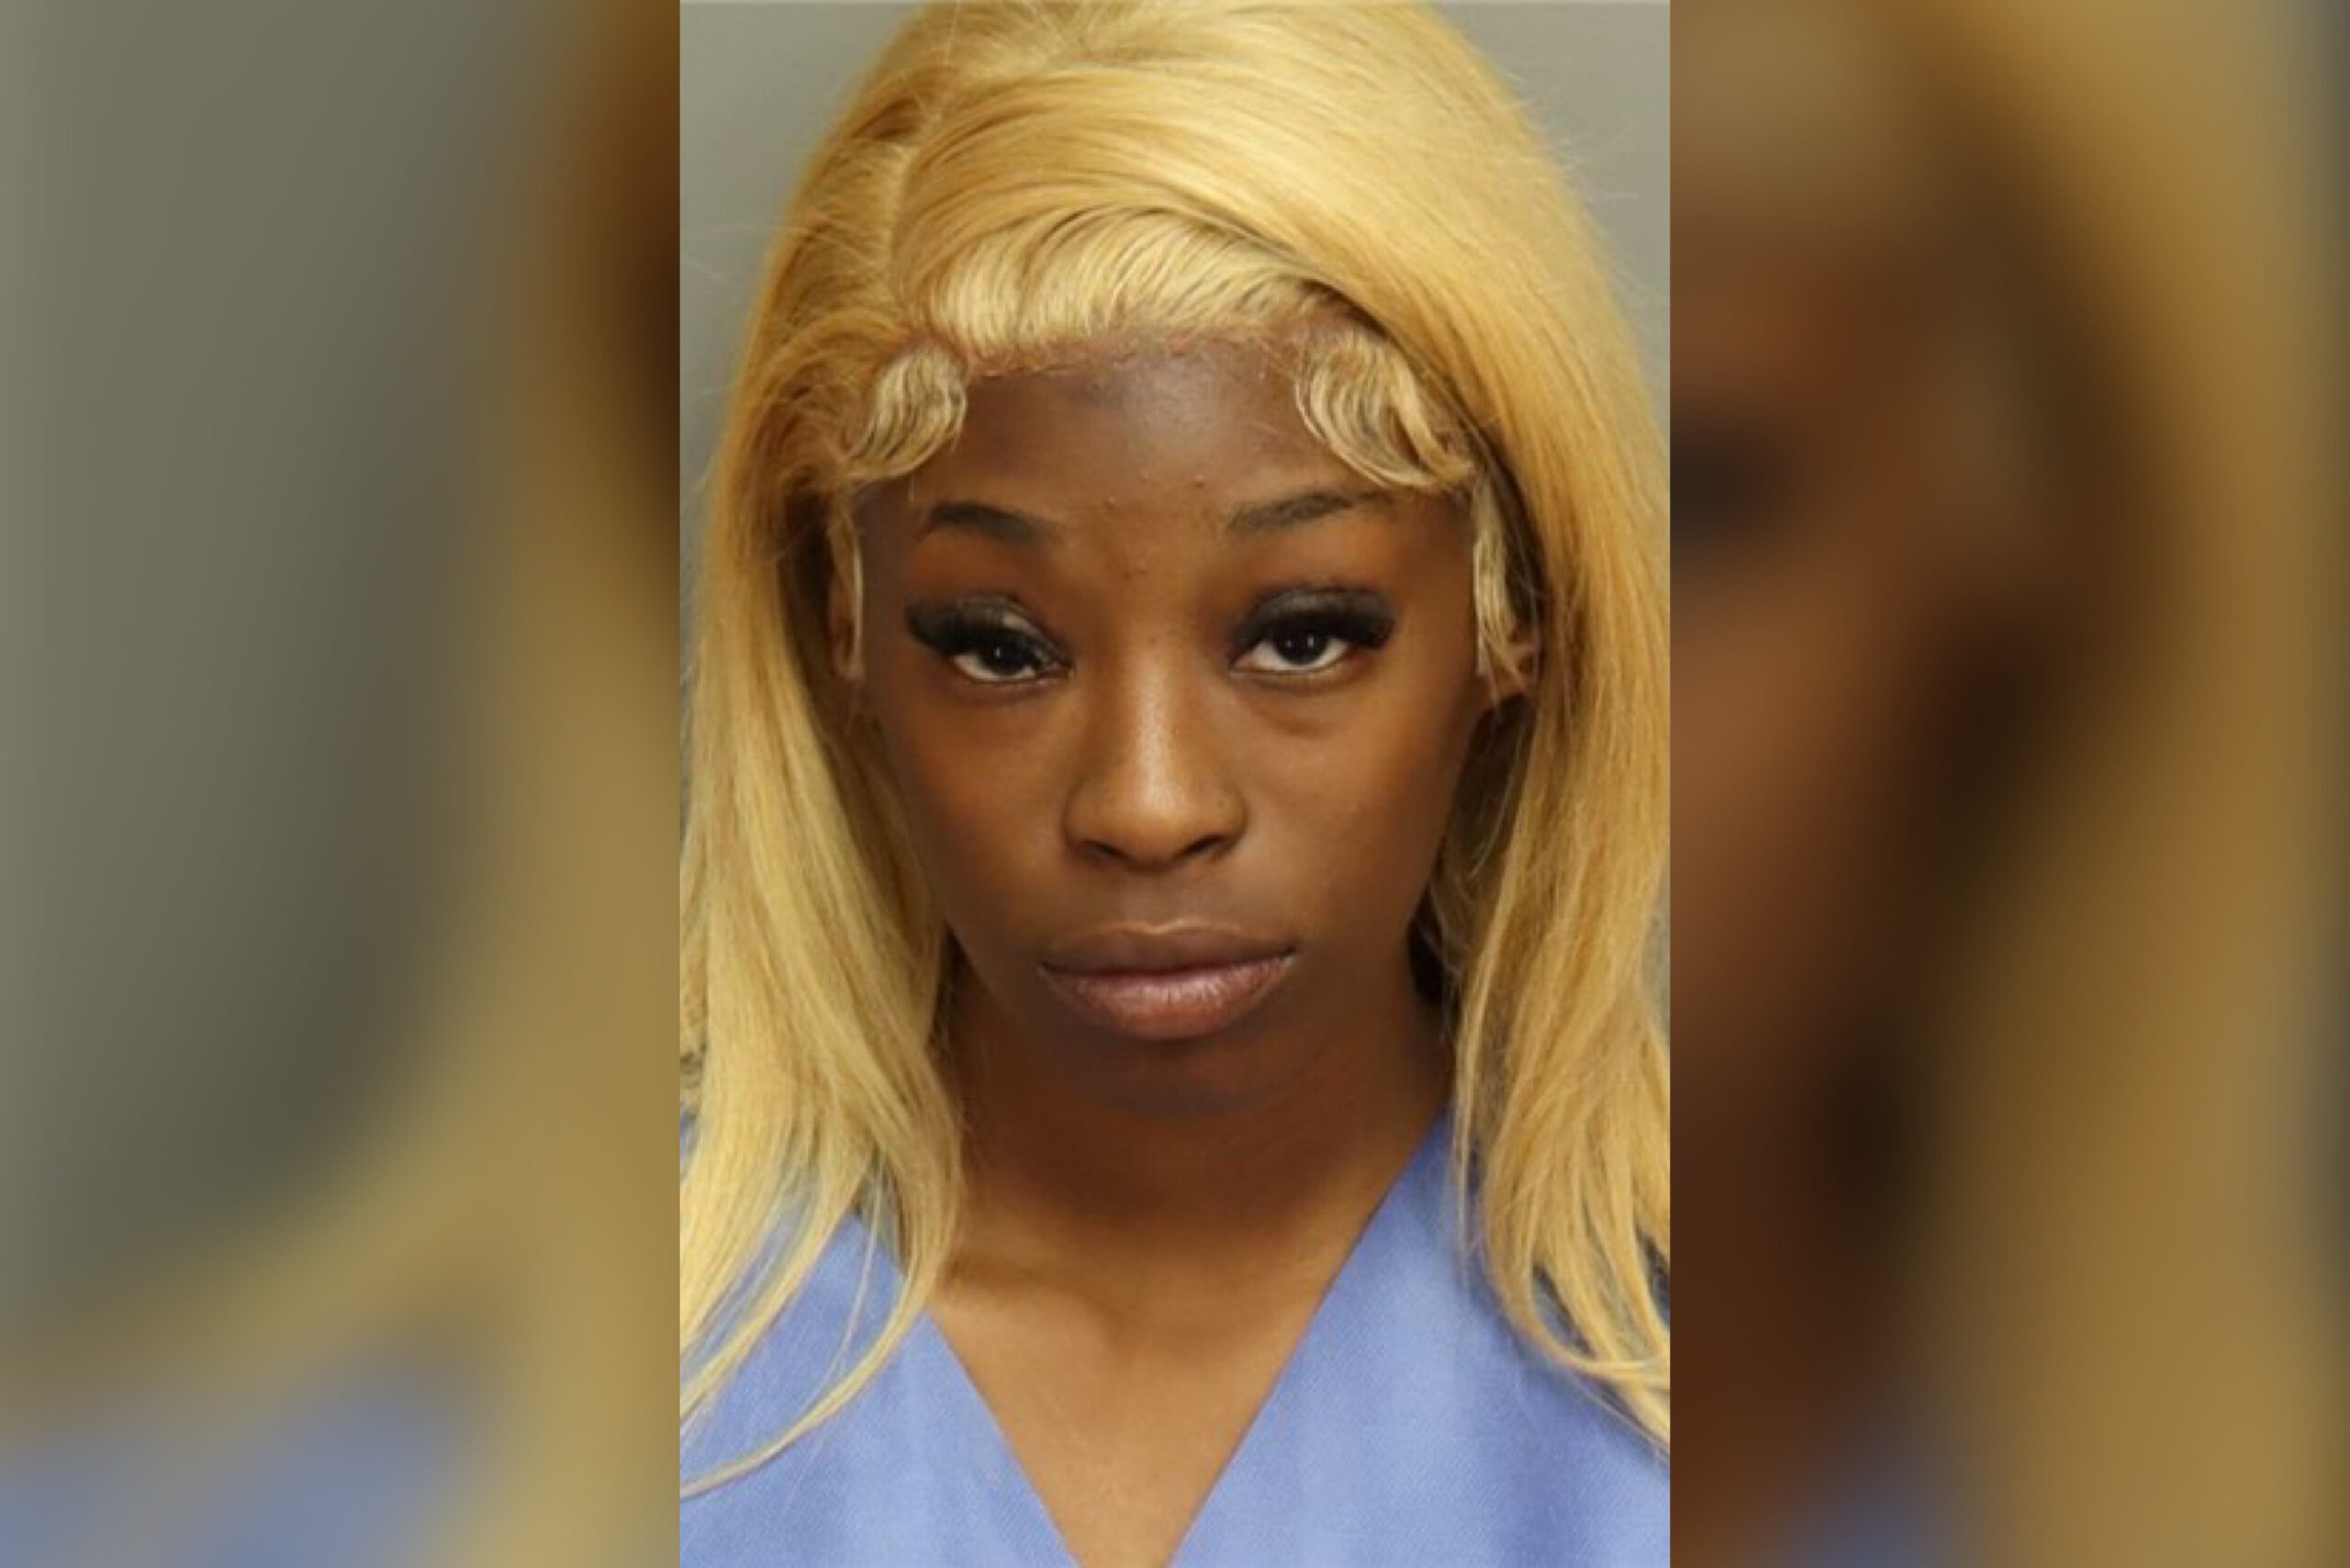 Florida Babysitter Arrested After Filming Herself Putting Lit Joint In 1-Year-Old’s Mouth